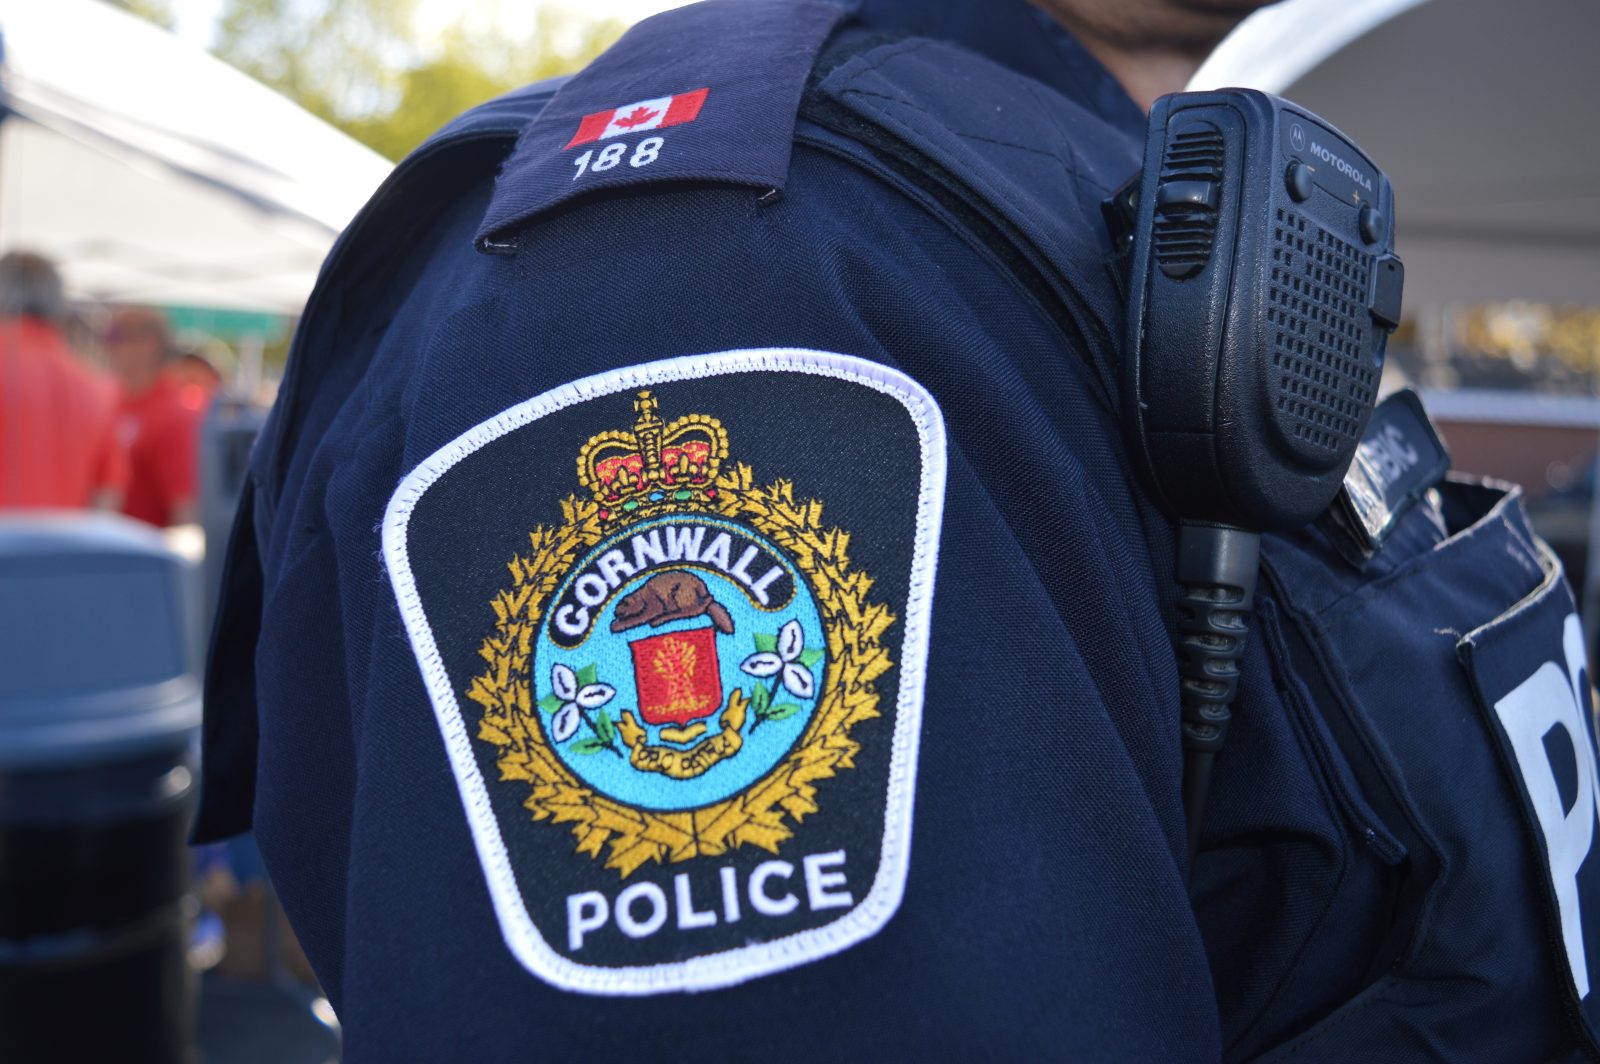 Cornwall man arrested on weapons charges, assaulting a police officer, more . . .